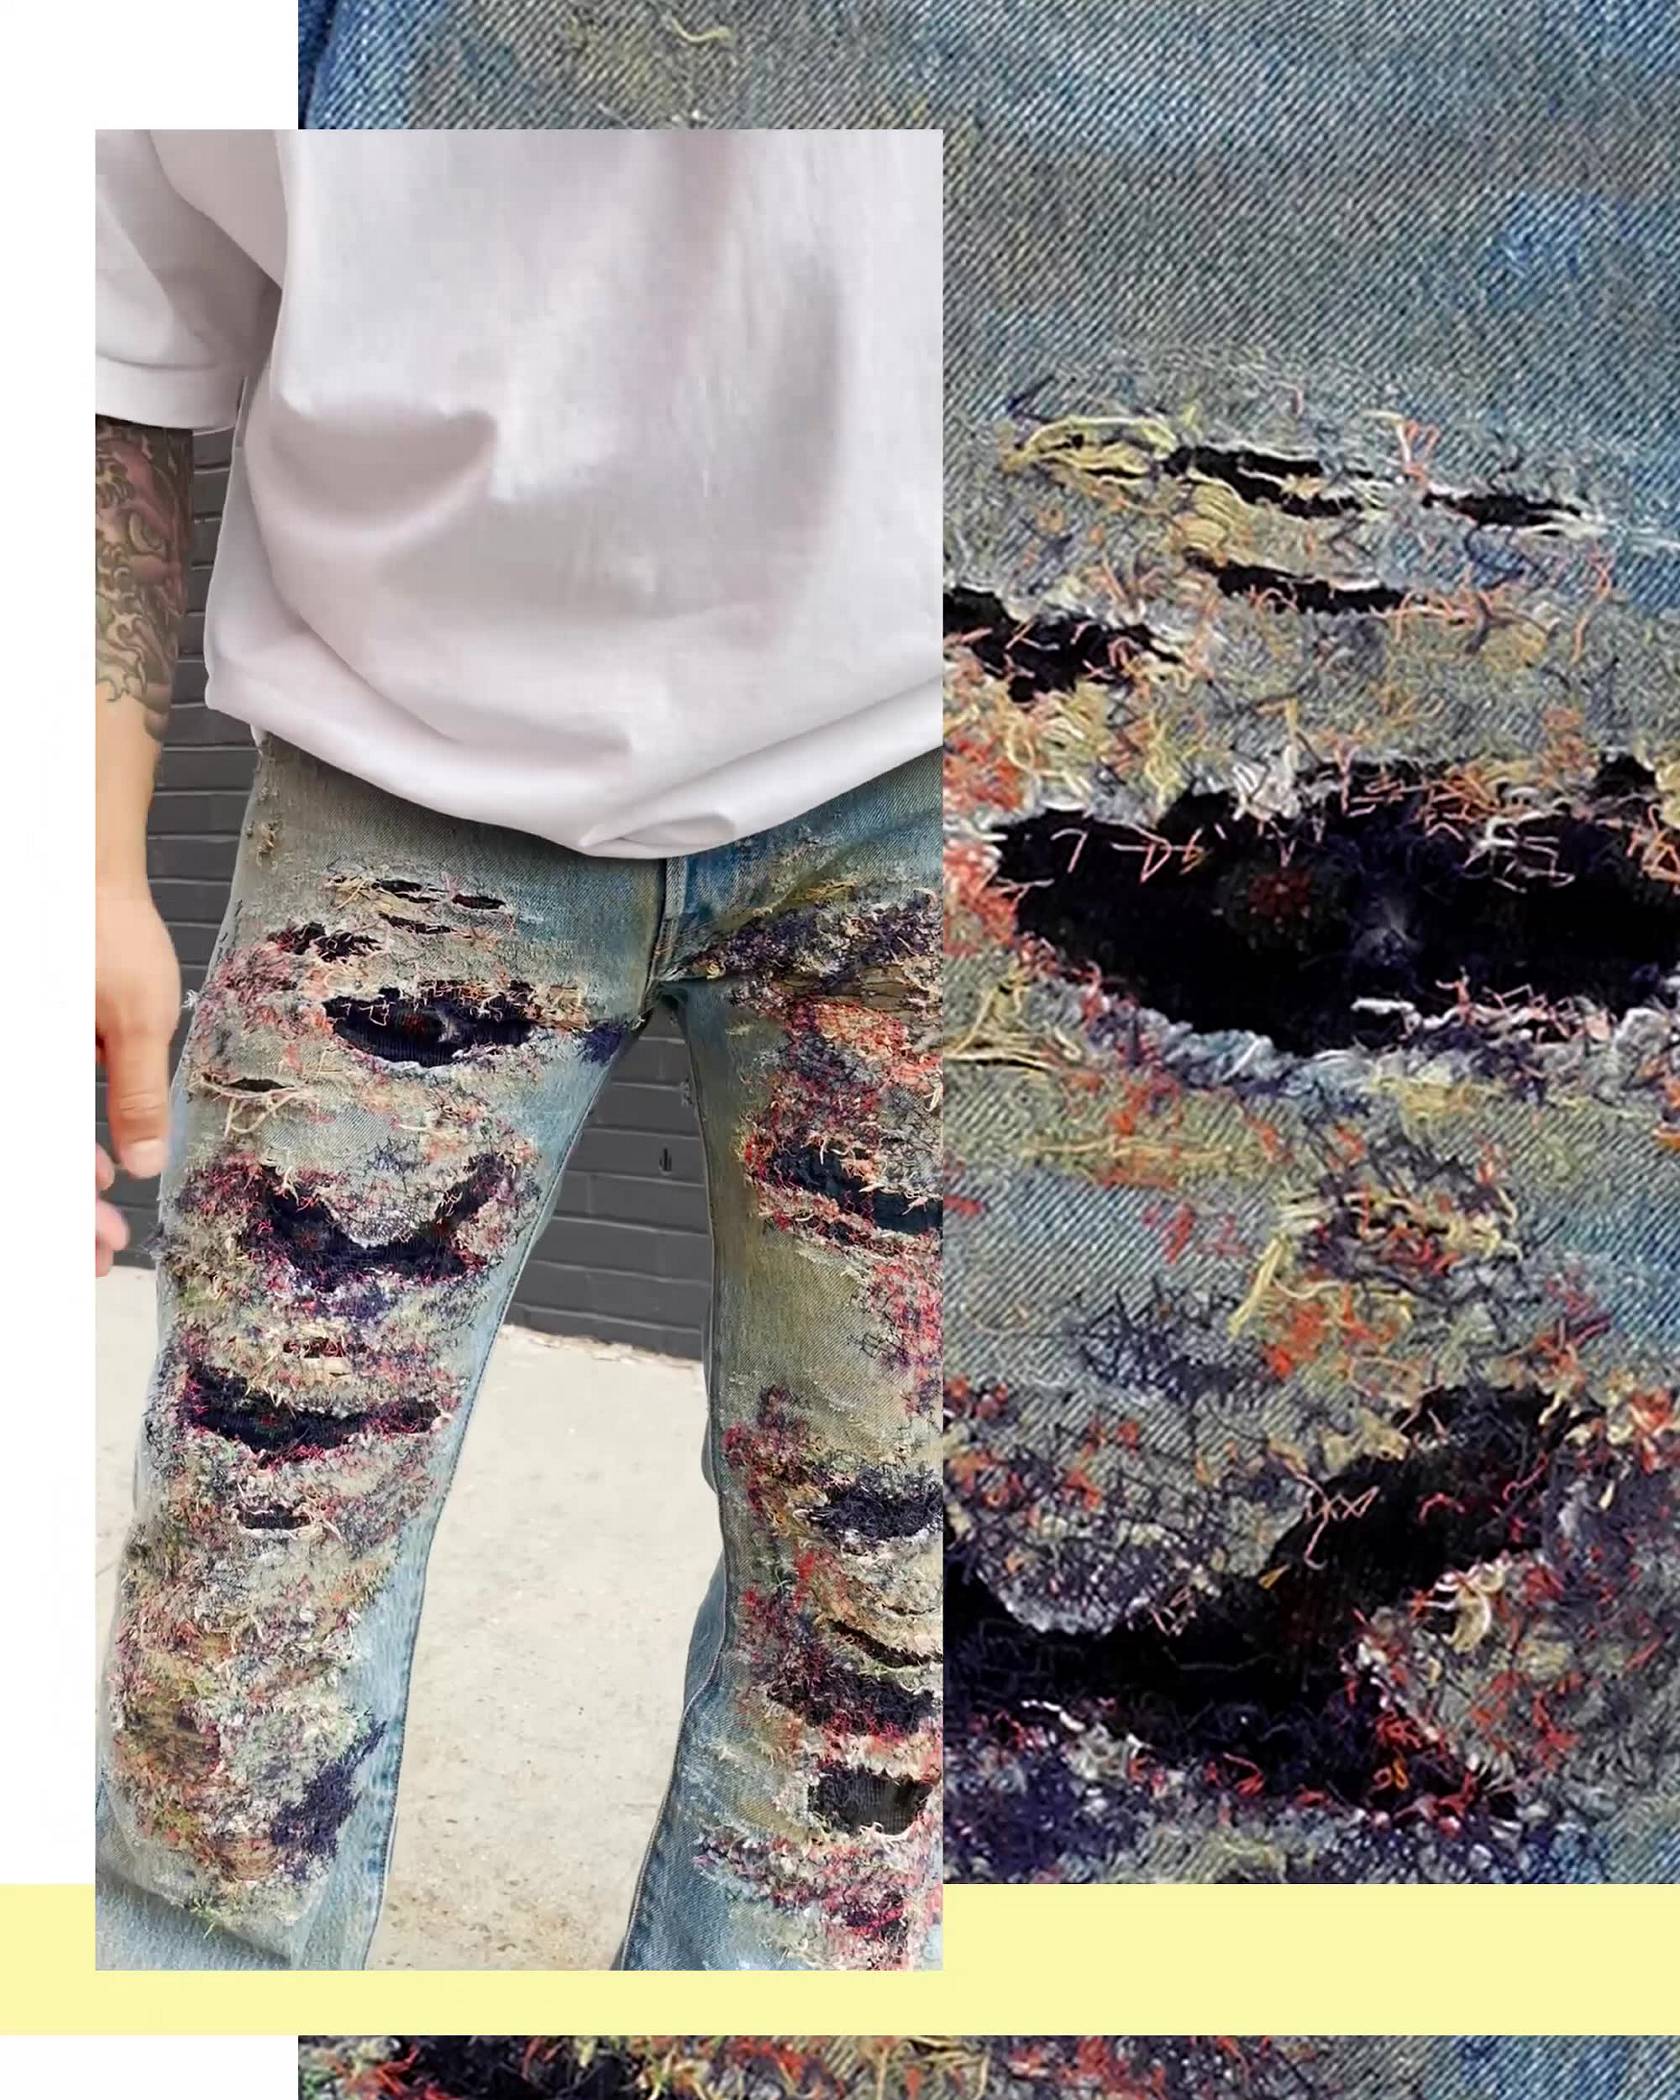 Phillip Leyesa in a close-up shot of Levi's 501 Jeans after his customization process showing detailed distressed effect.